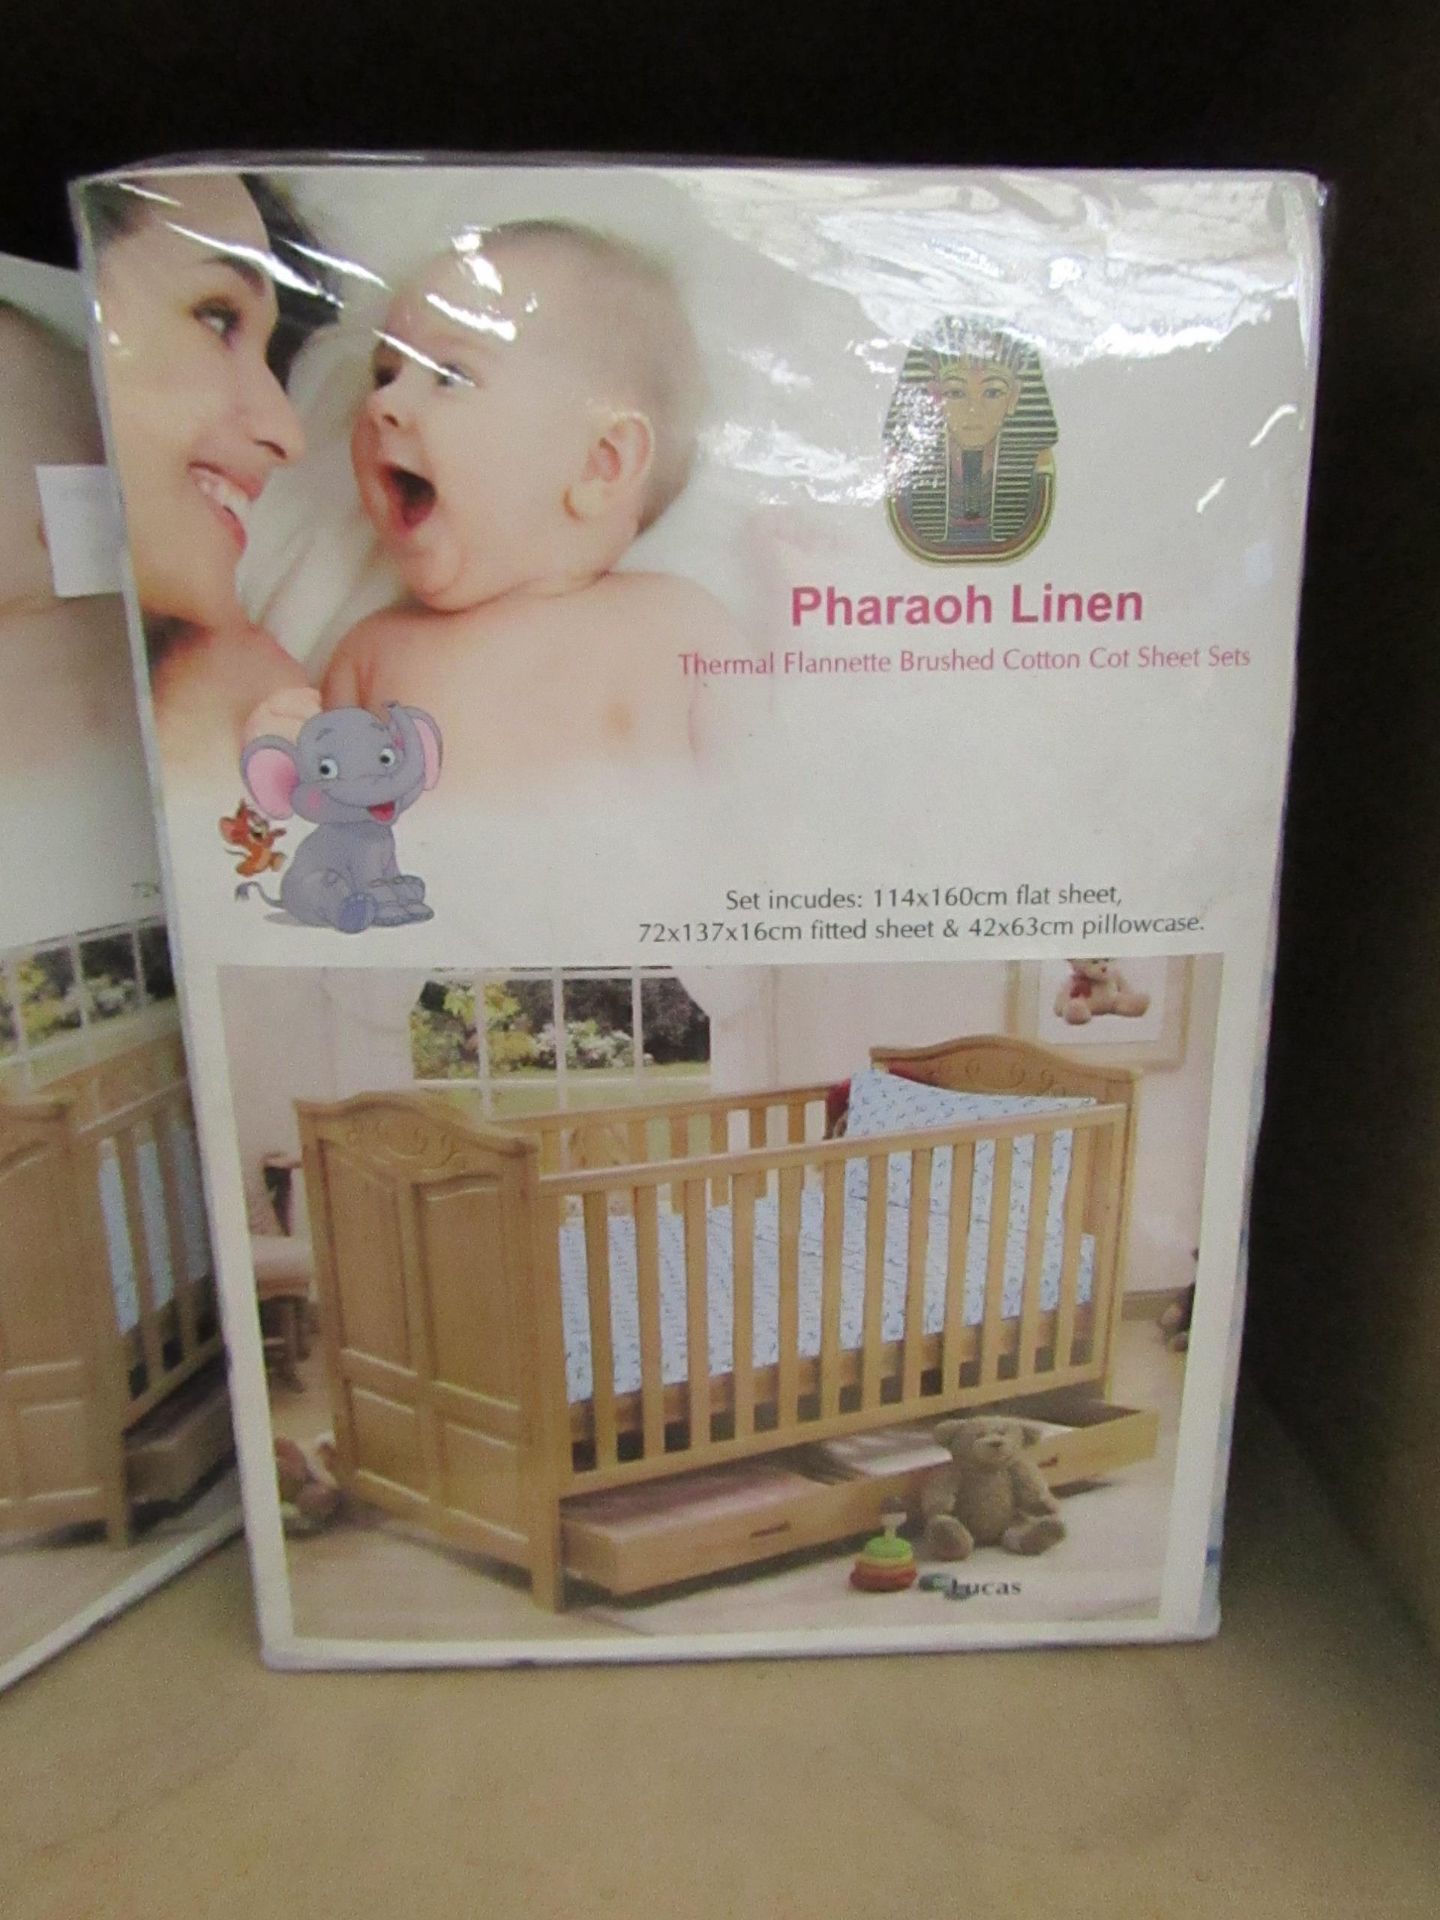 Pharaoh Linen Thermal Flannel brushed cotton cot sheet set, new and packaged.